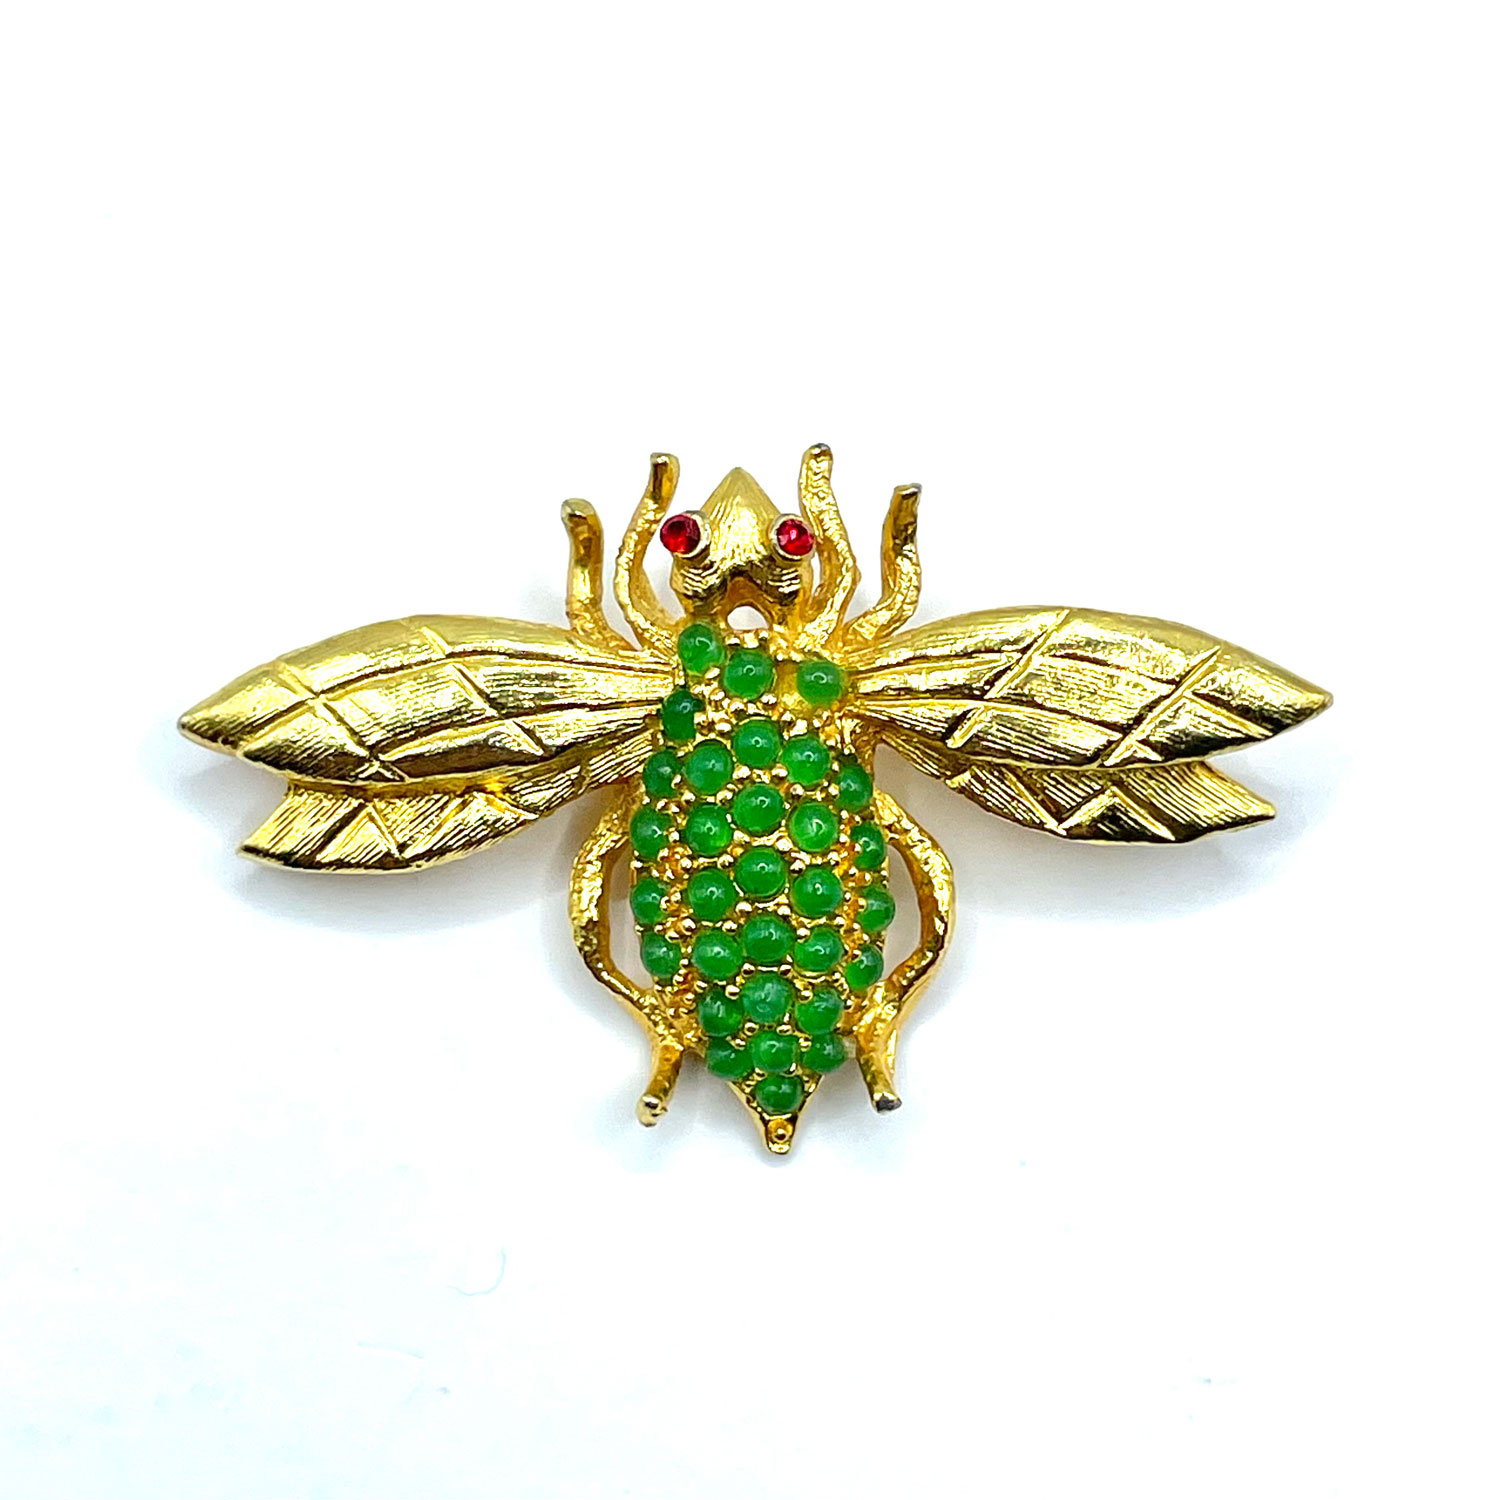 Frances Hirsch insect brooch